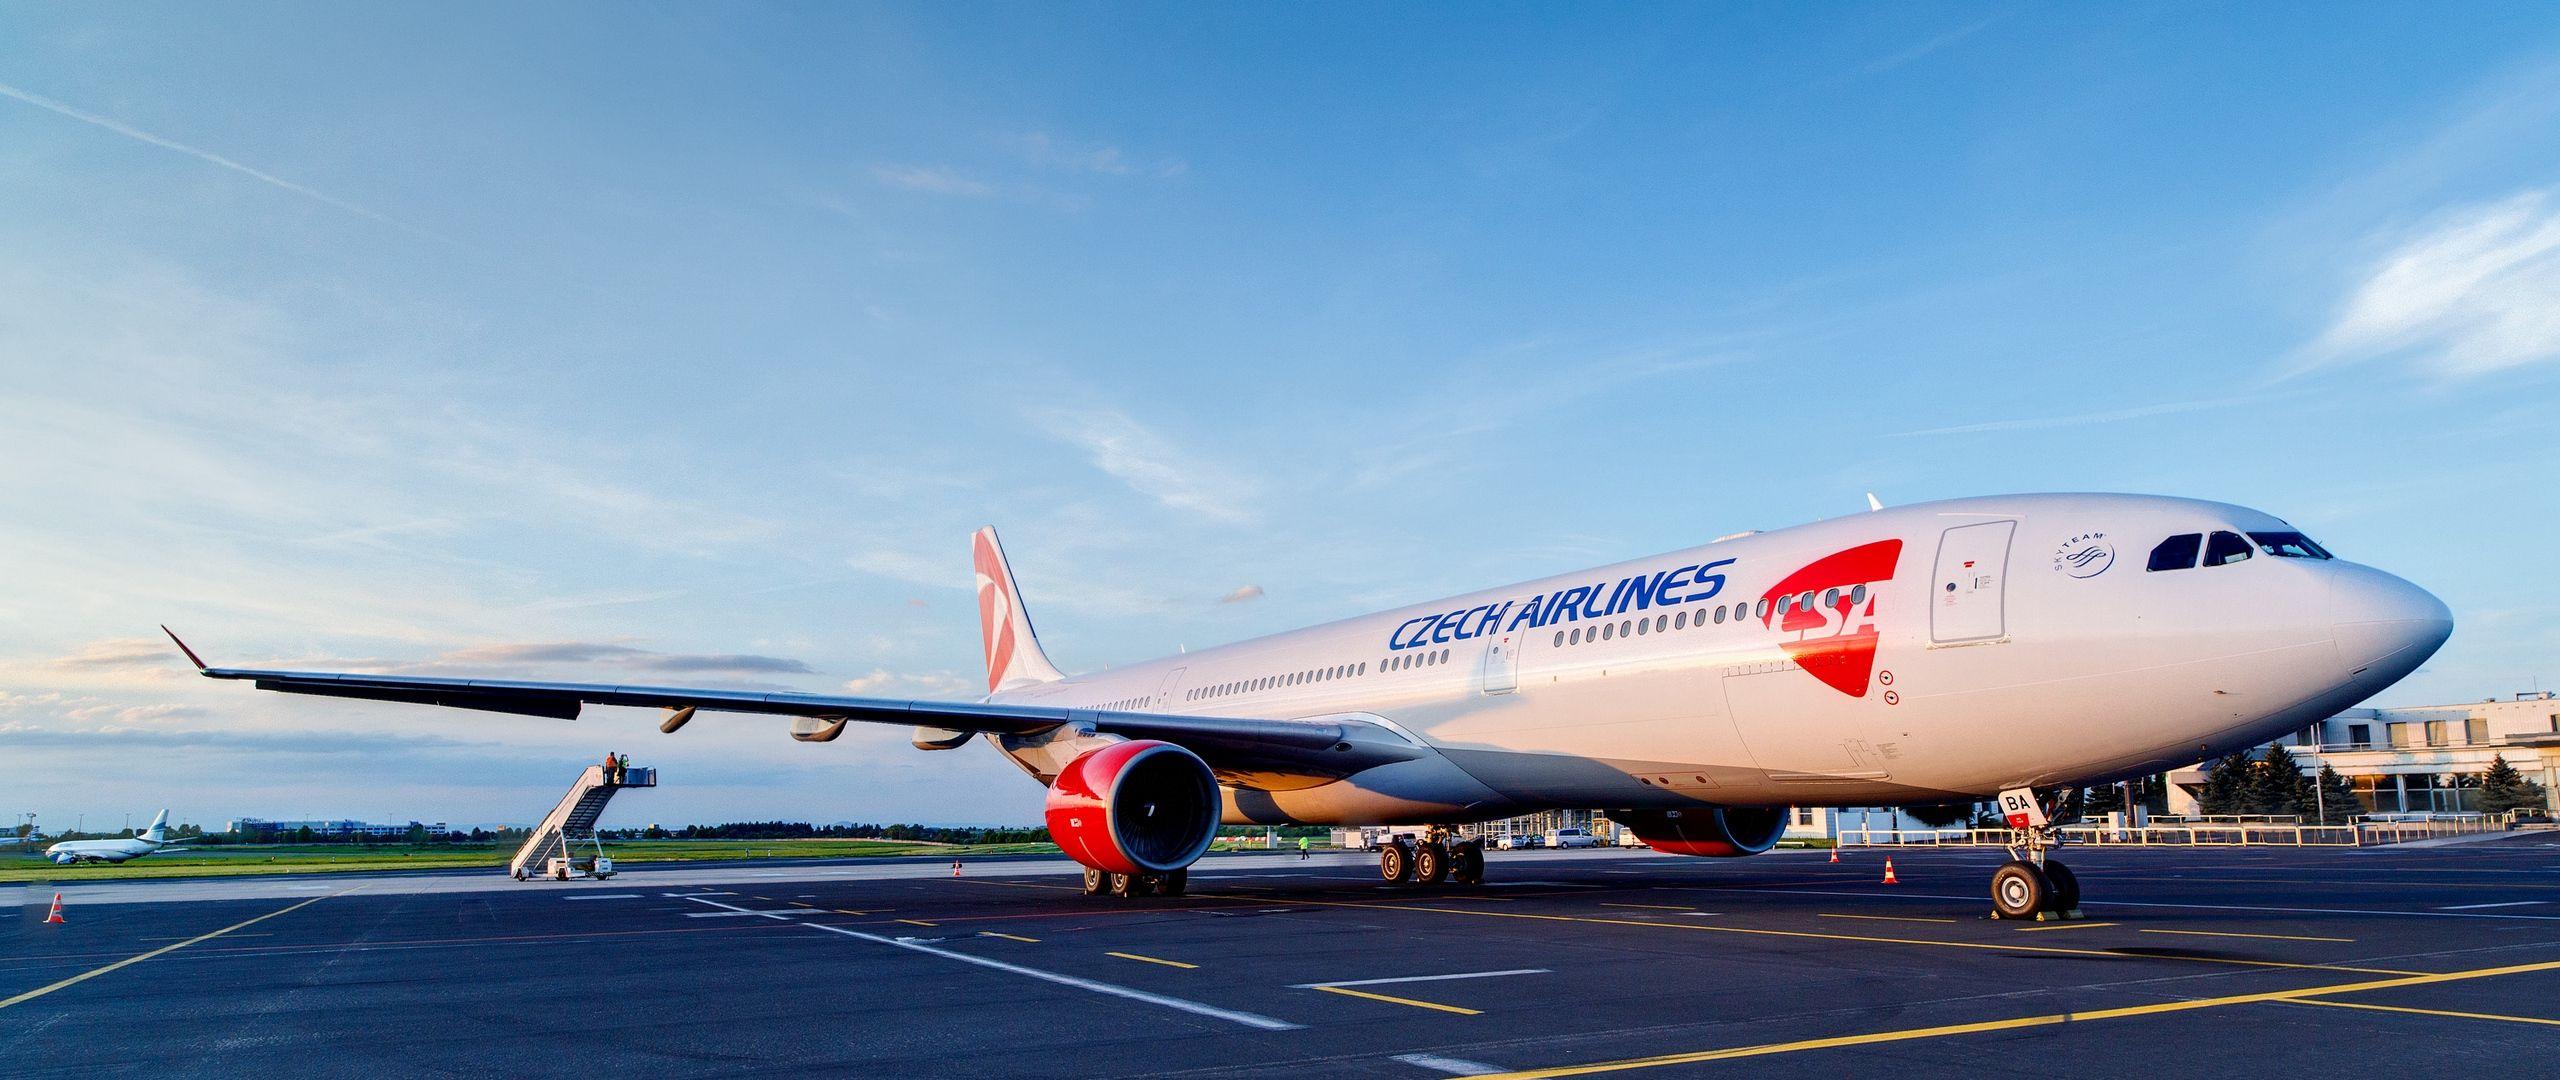 Download wallpaper 2560x1080 airbus, a czech, airlines dual